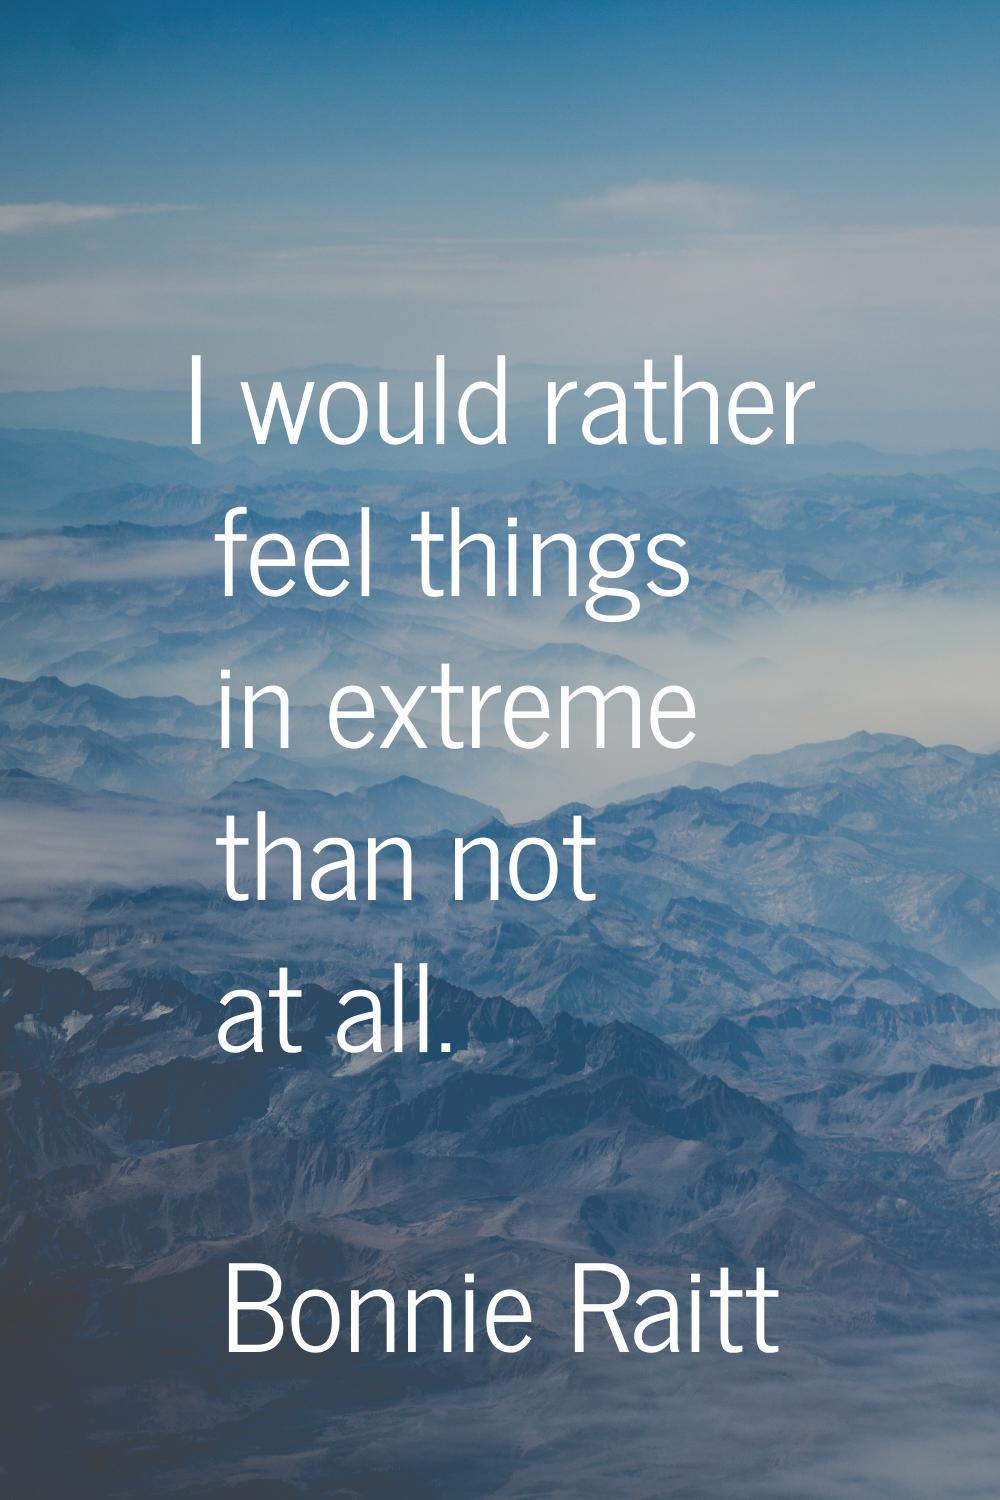 I would rather feel things in extreme than not at all.